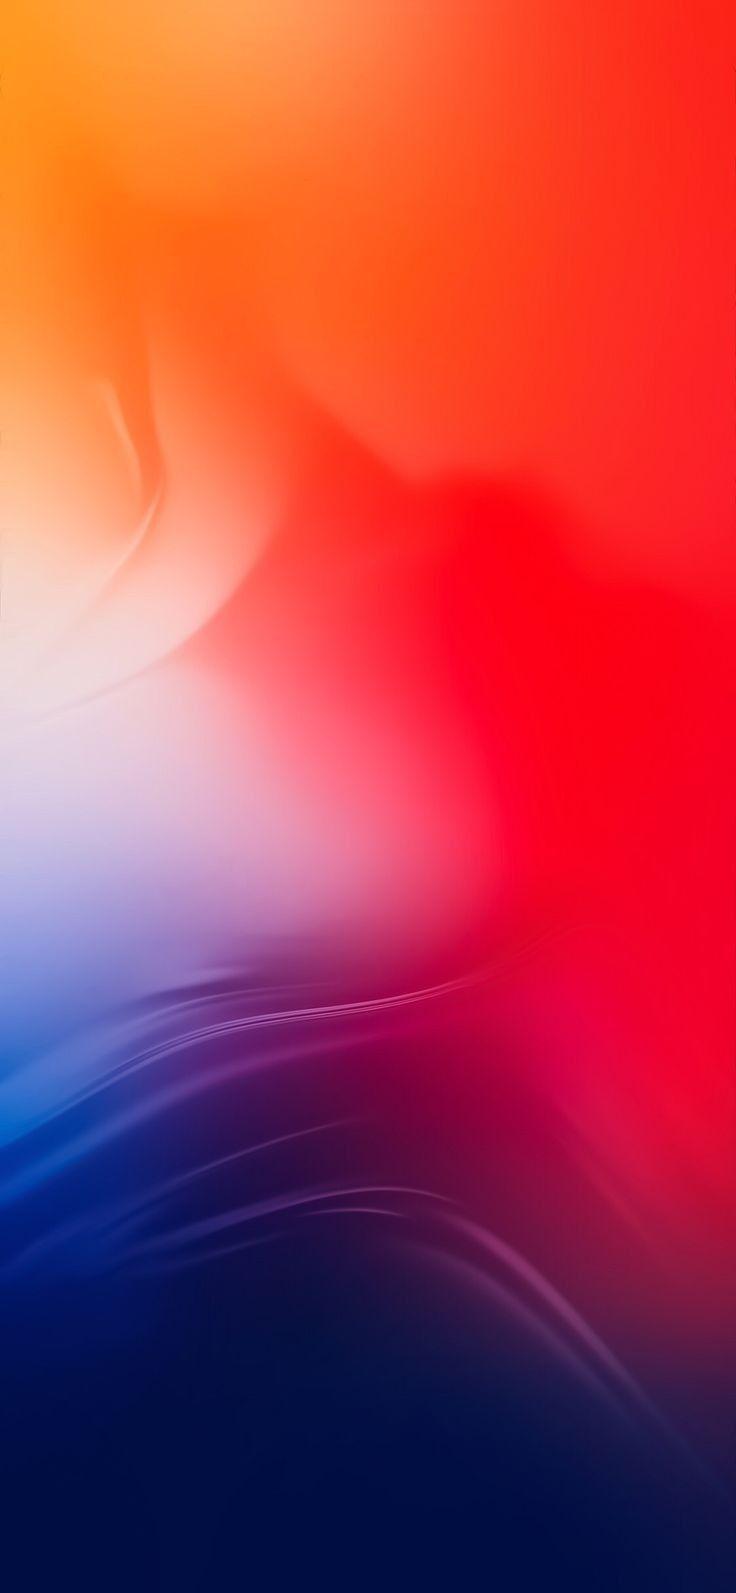 Wallpaper Apple Amoled IPhone WWDC 2020 Apples Background  Download  Free Image